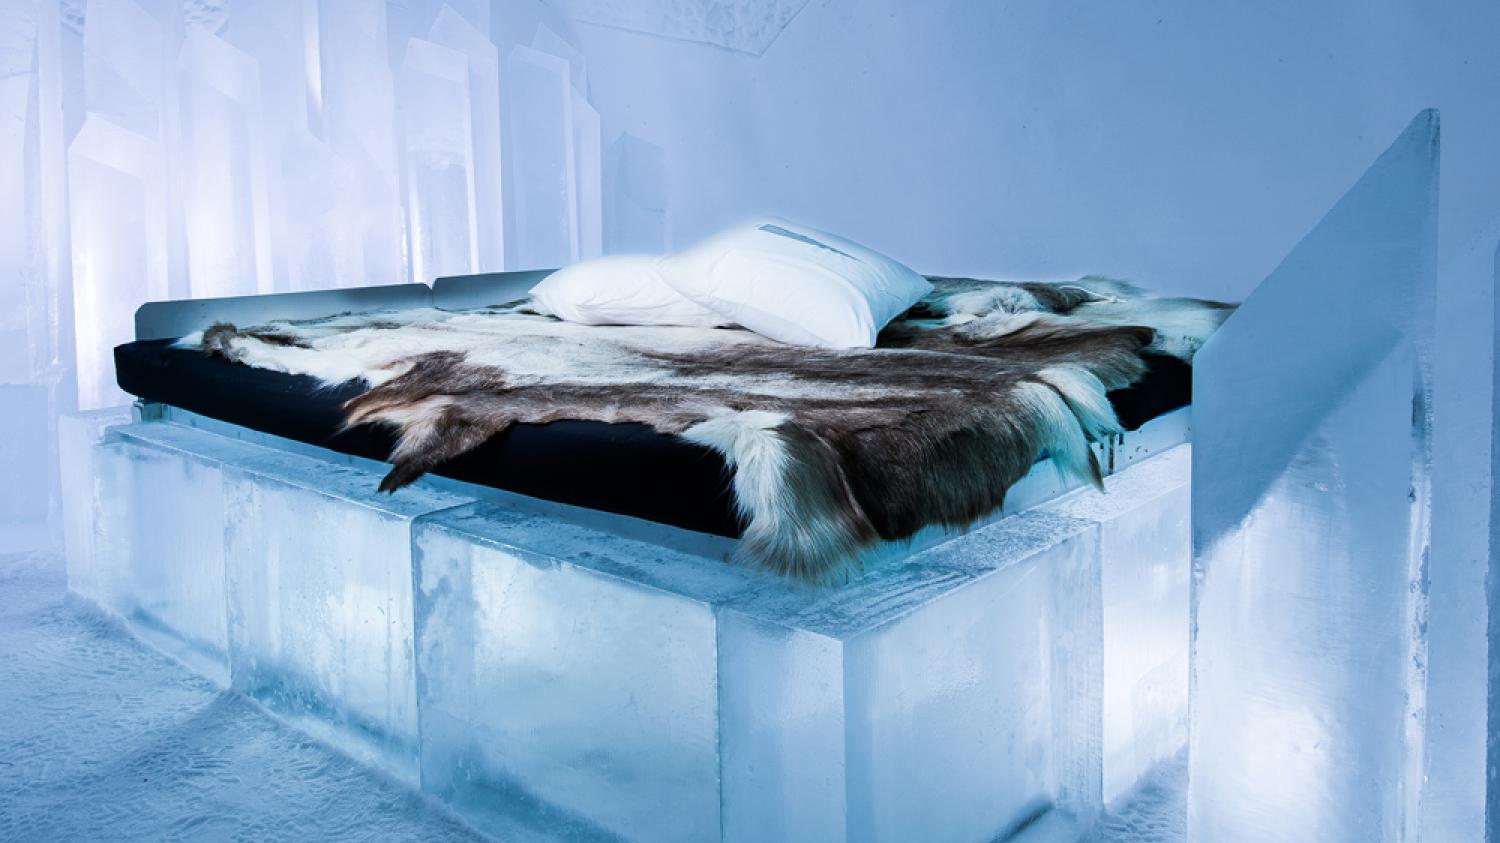 https://www.icehotel.com/sites/cb_icehotel/files/styles/image_column_large/public/Ice-room-Icehotel.jpg?h=d40308df&itok=3a2kpNMw